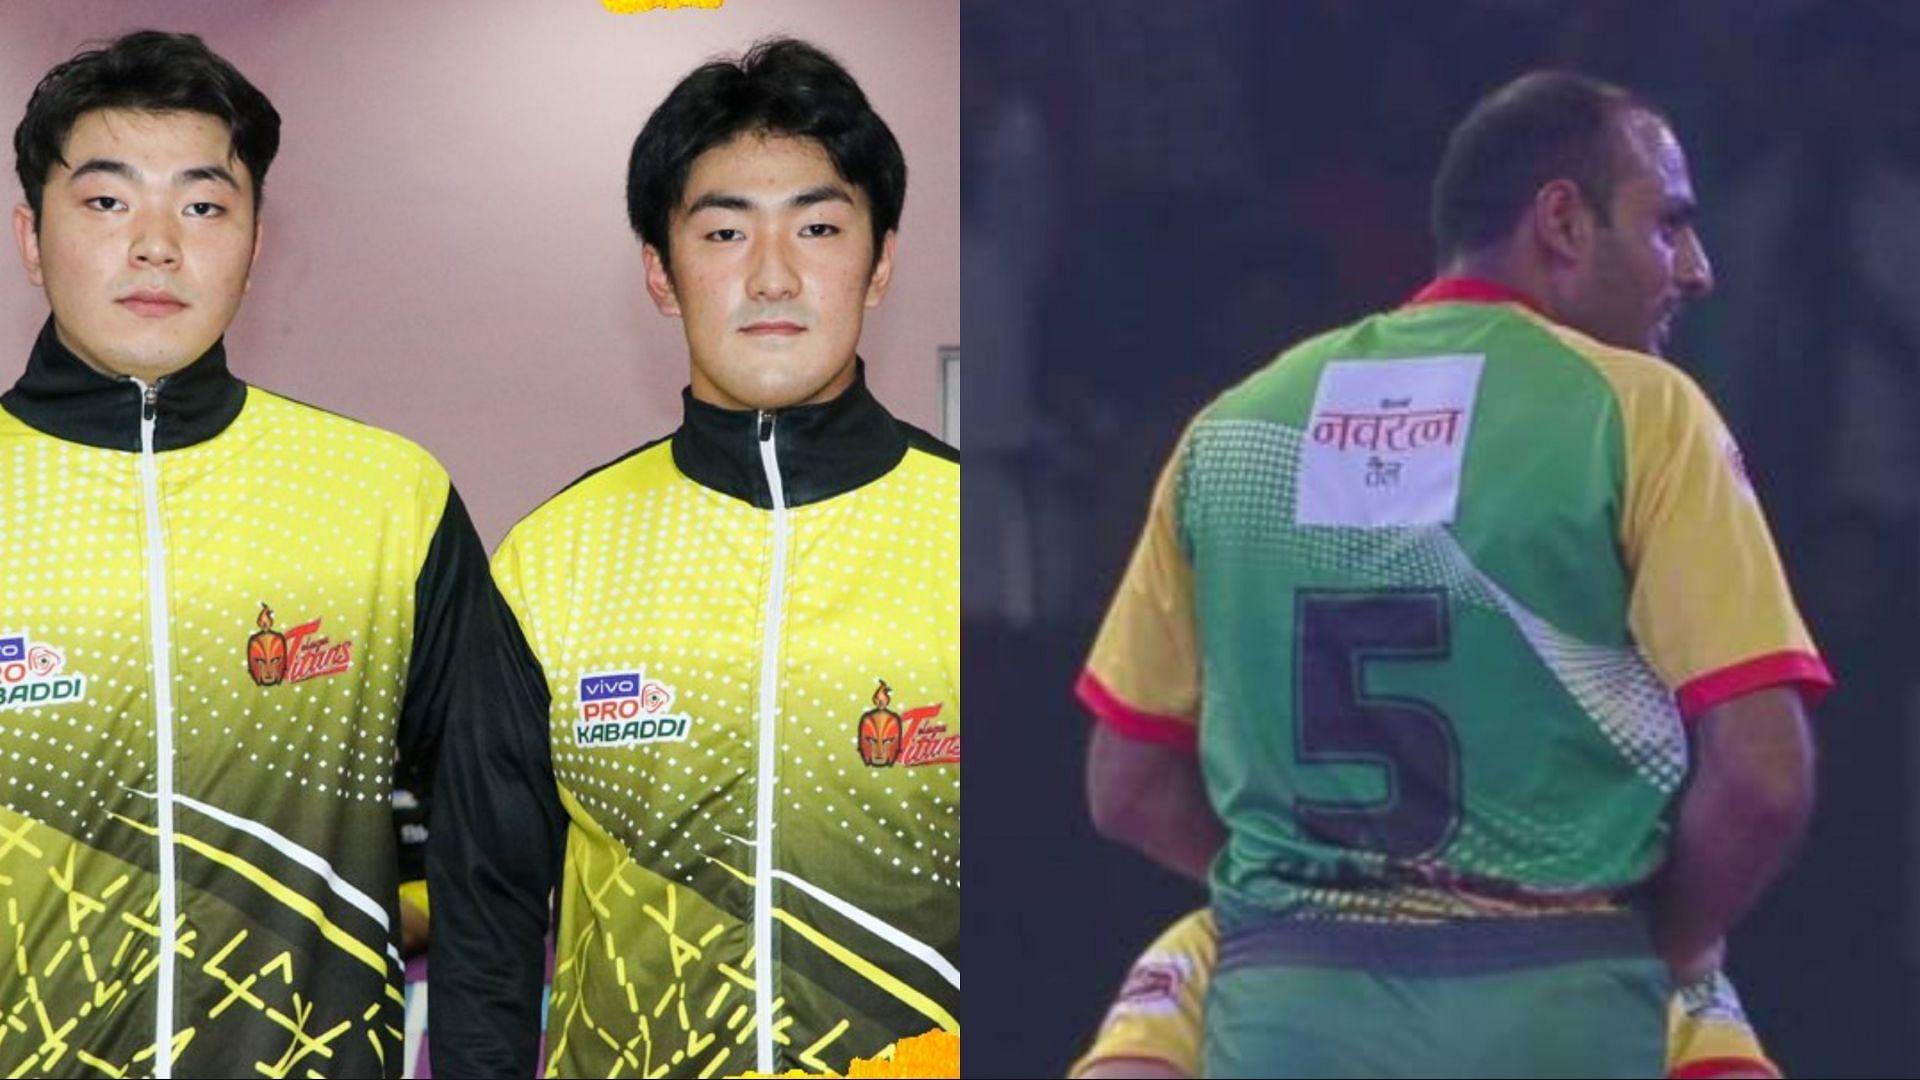 Japan and Pakistan have been missing from Pro Kabaddi (Image: PKL)